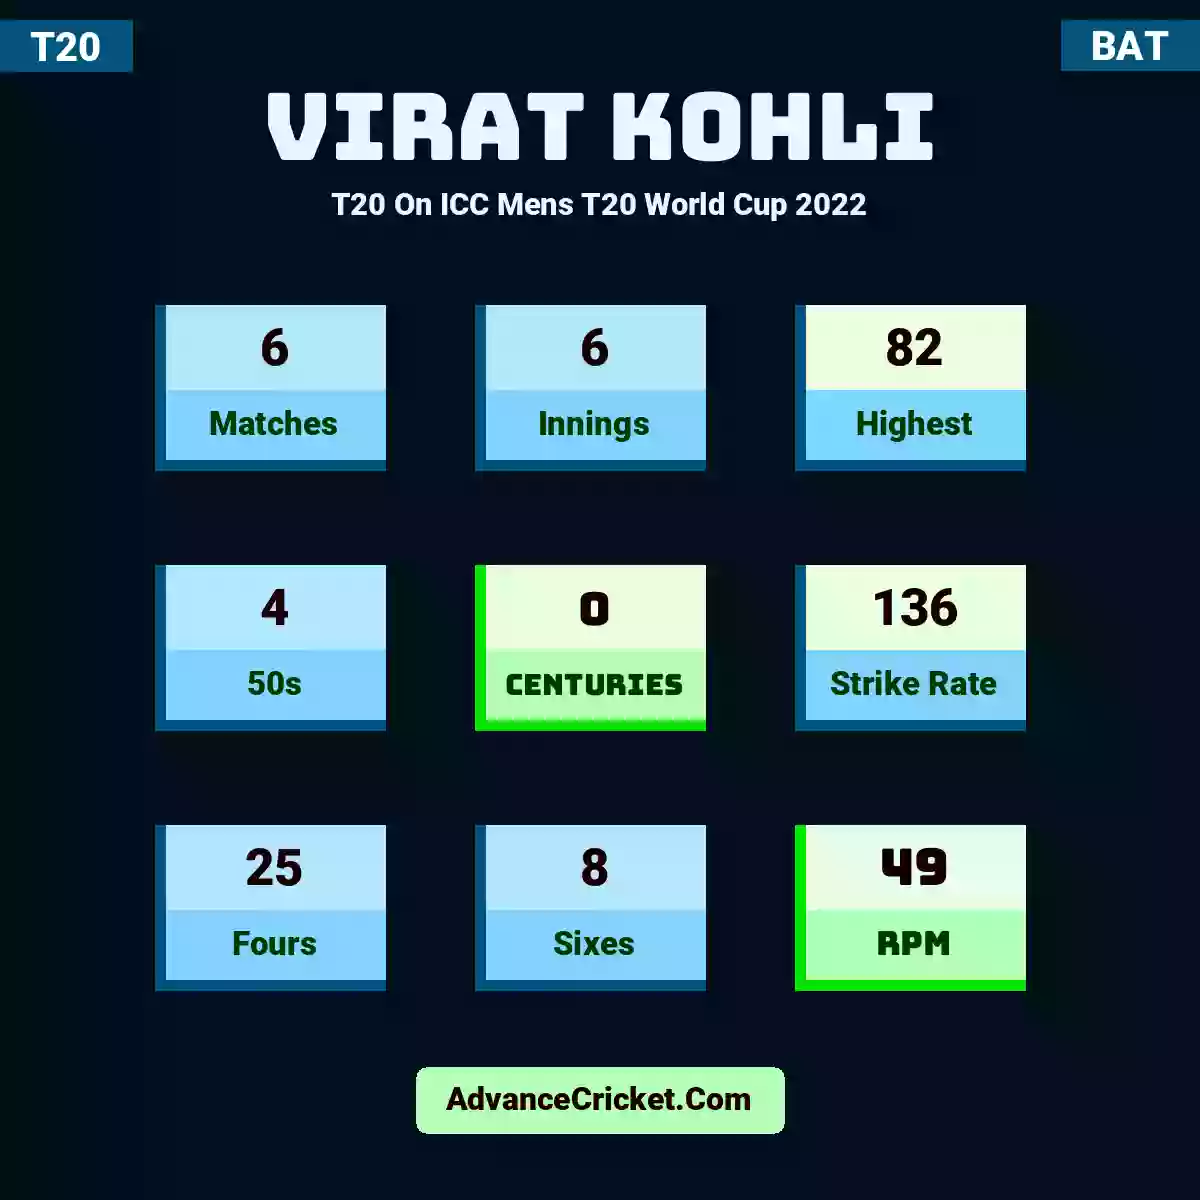 Virat Kohli T20  On ICC Mens T20 World Cup 2022, Virat Kohli played 6 matches, scored 82 runs as highest, 4 half-centuries, and 0 centuries, with a strike rate of 136. V.Kohli hit 25 fours and 8 sixes, with an RPM of 49.